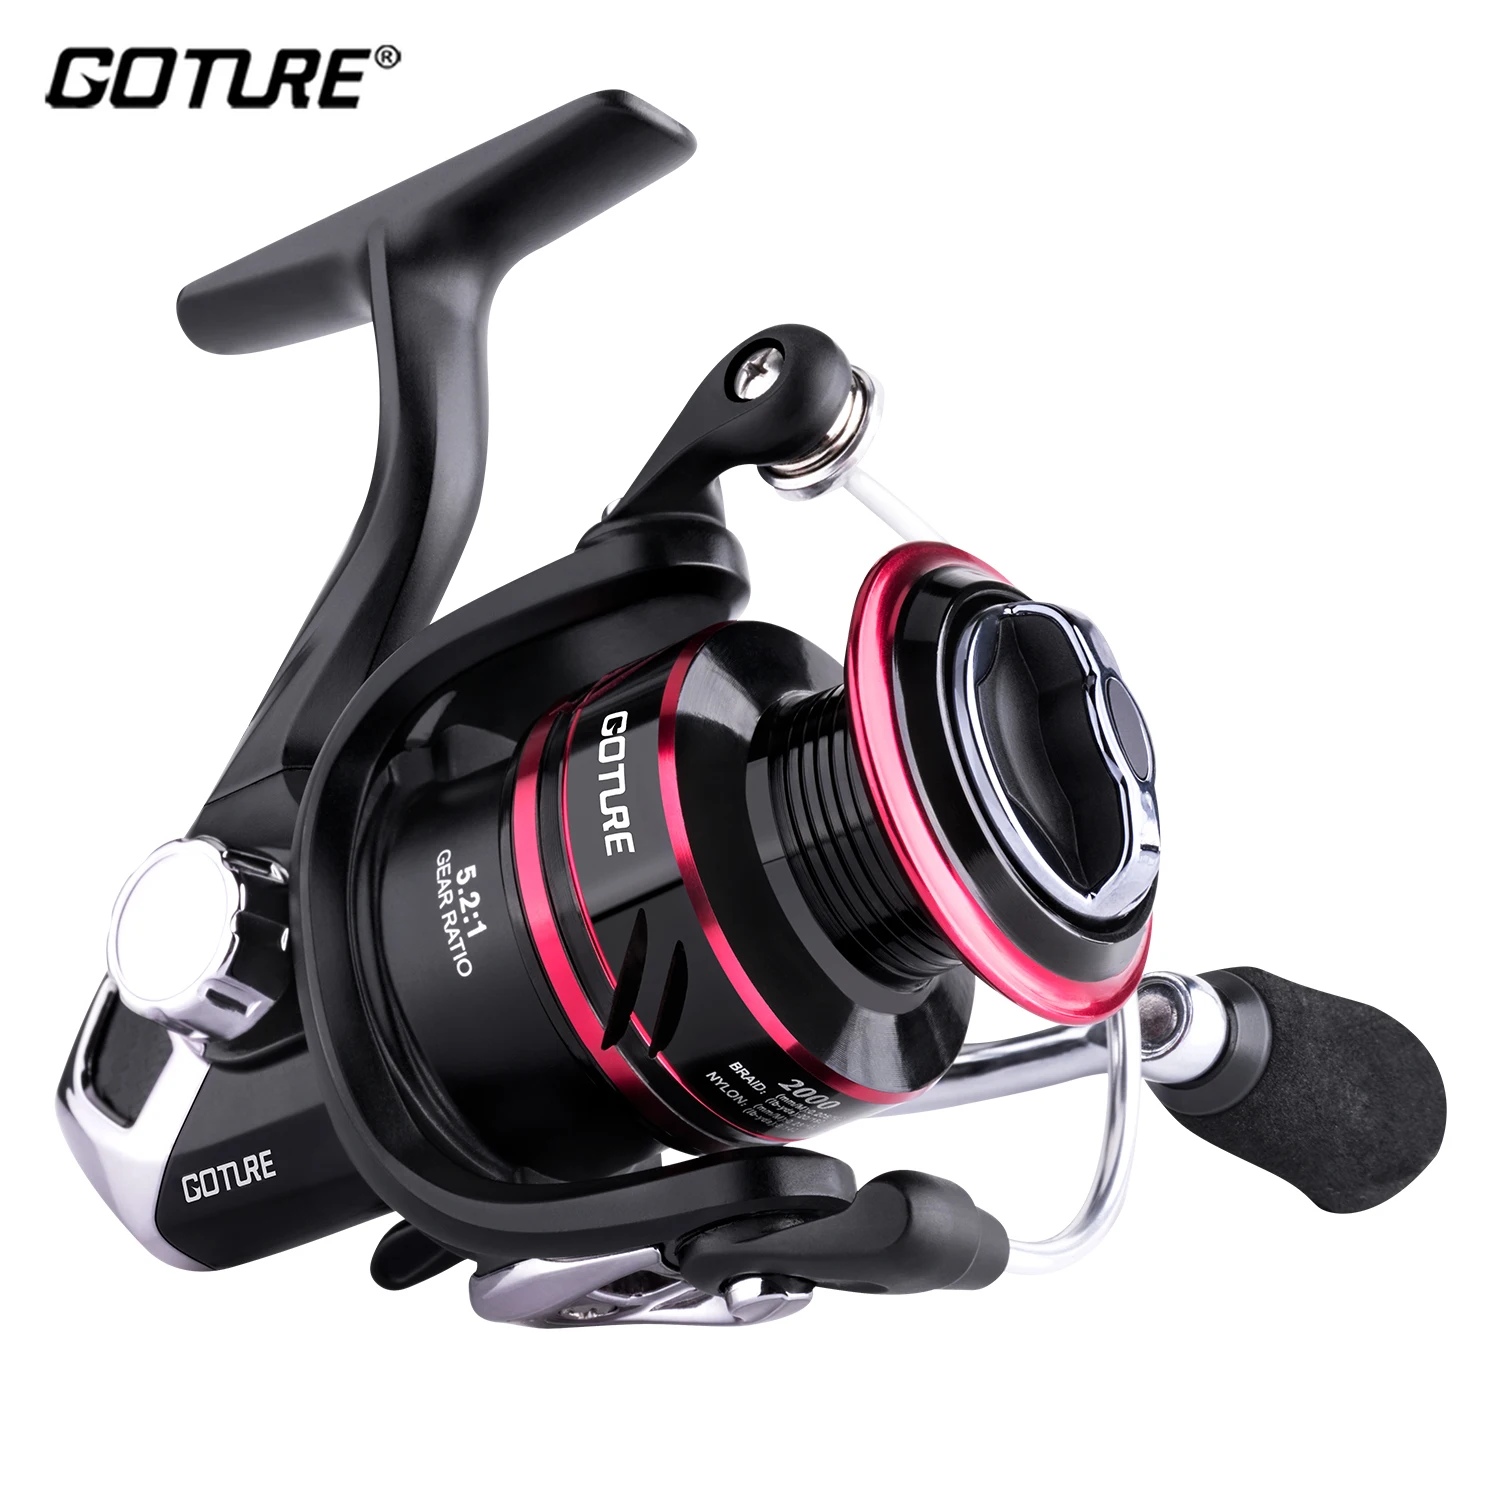 Goture Metal Fishing Reel Coil Sea Spinning Reels Deep and Shallow Spool Series 5.2:1 6BB Drag Power 8kg For Stream Fishing